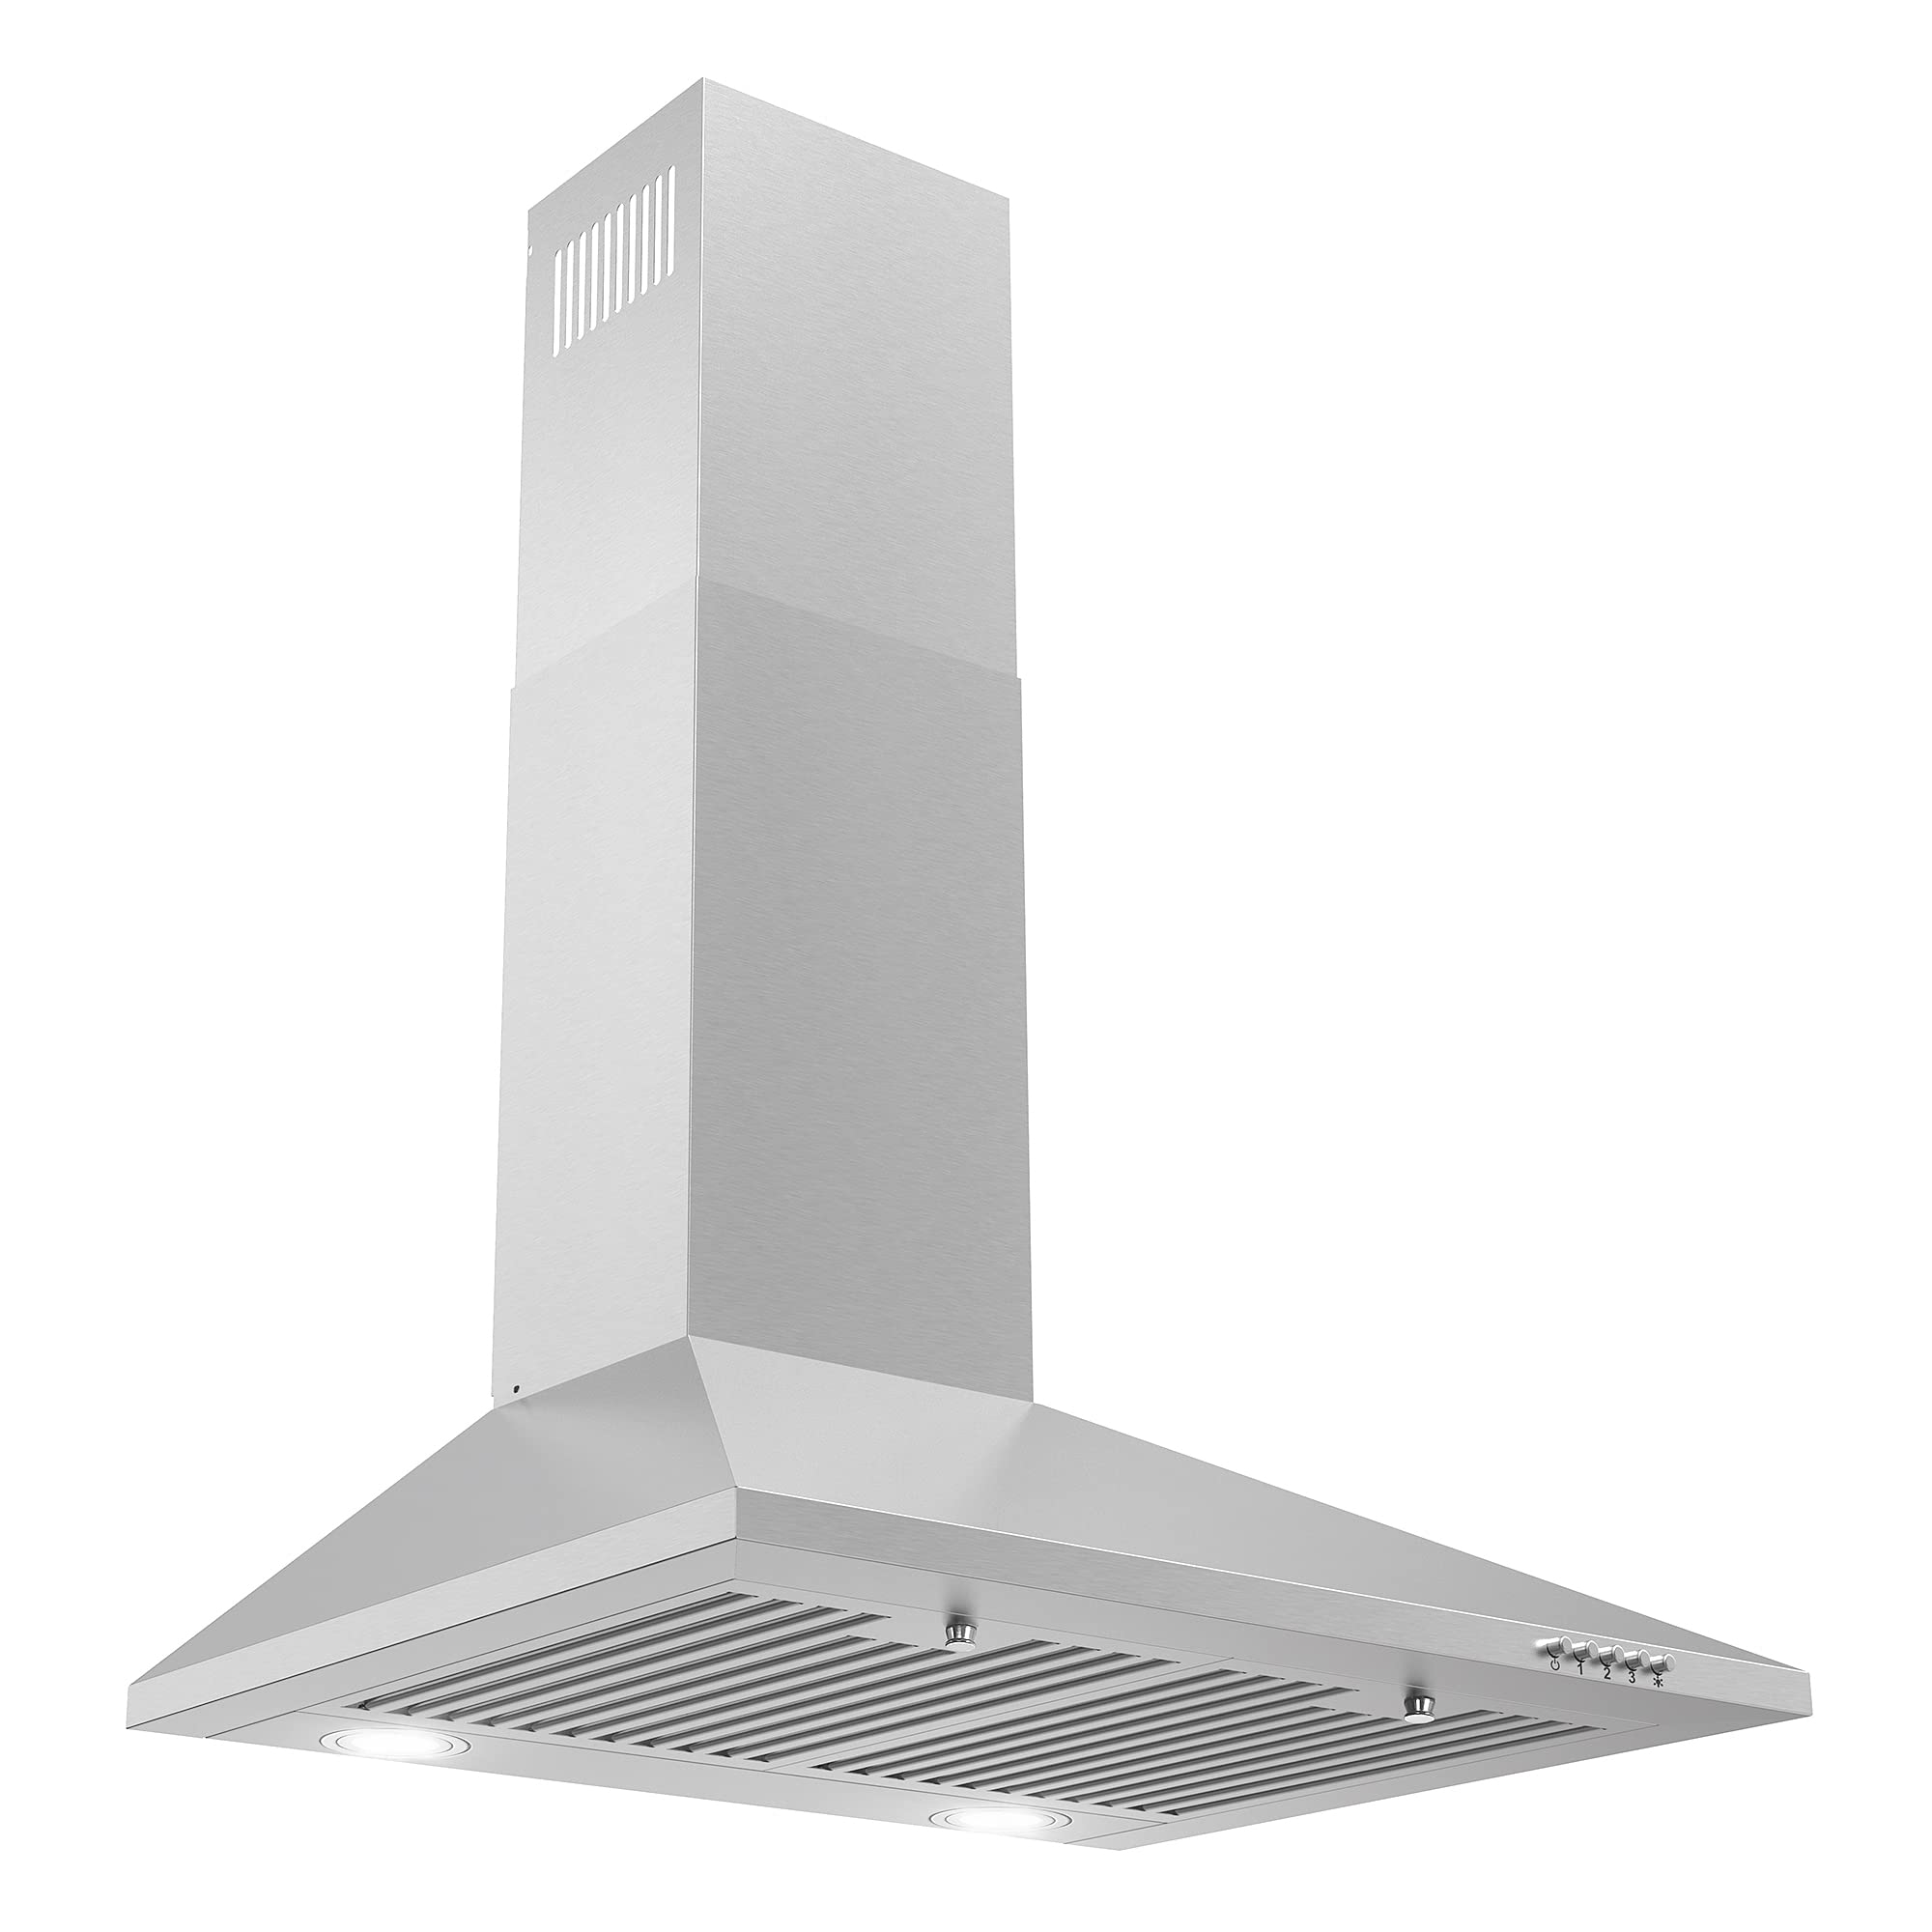 COSMO COS-6324EWH Wall Mount Range Hood, Chimney-Style Over Stove Vent, 3 Speed Fan, Permanent Filters, LED Lights in Stainless Steel (24 inch)